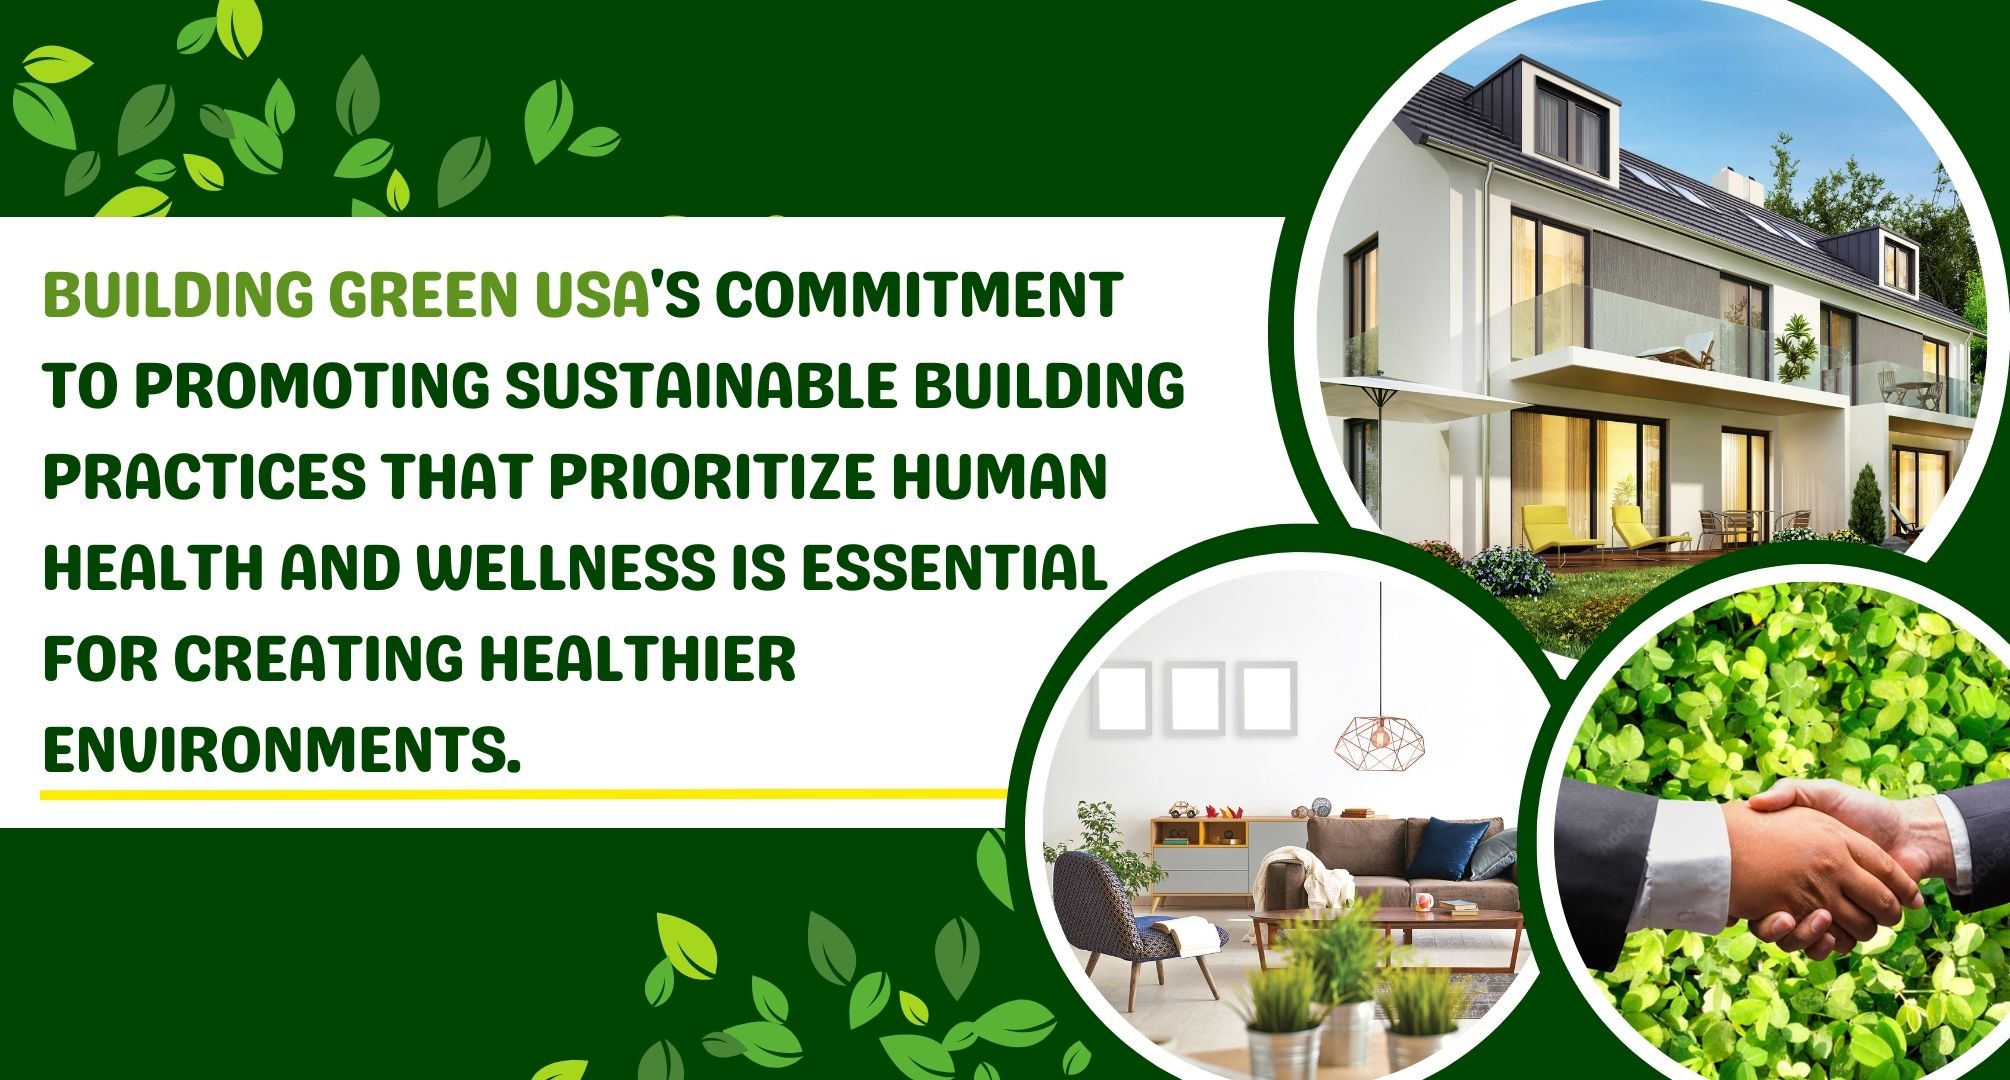 Building Green USA: Transforming Home Improvement into Eco-Friendly Solutions